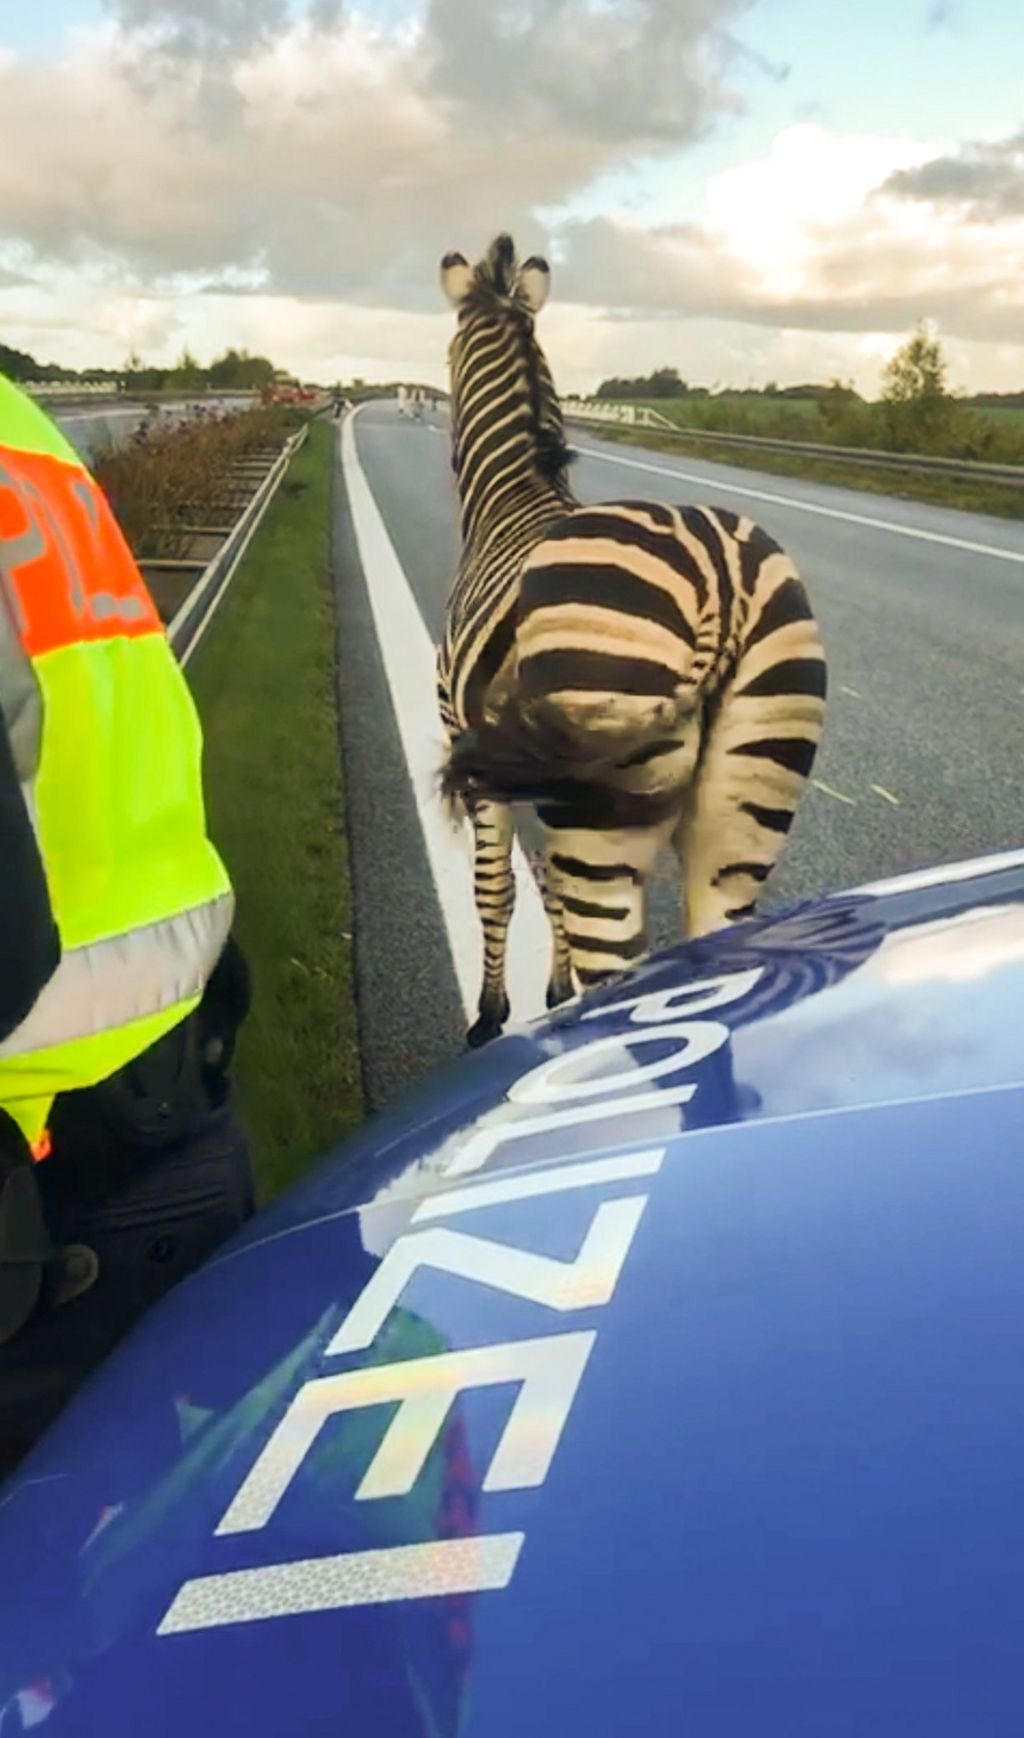 A zebra walks next to a police car on the A20 motorway on 2 October, 2019